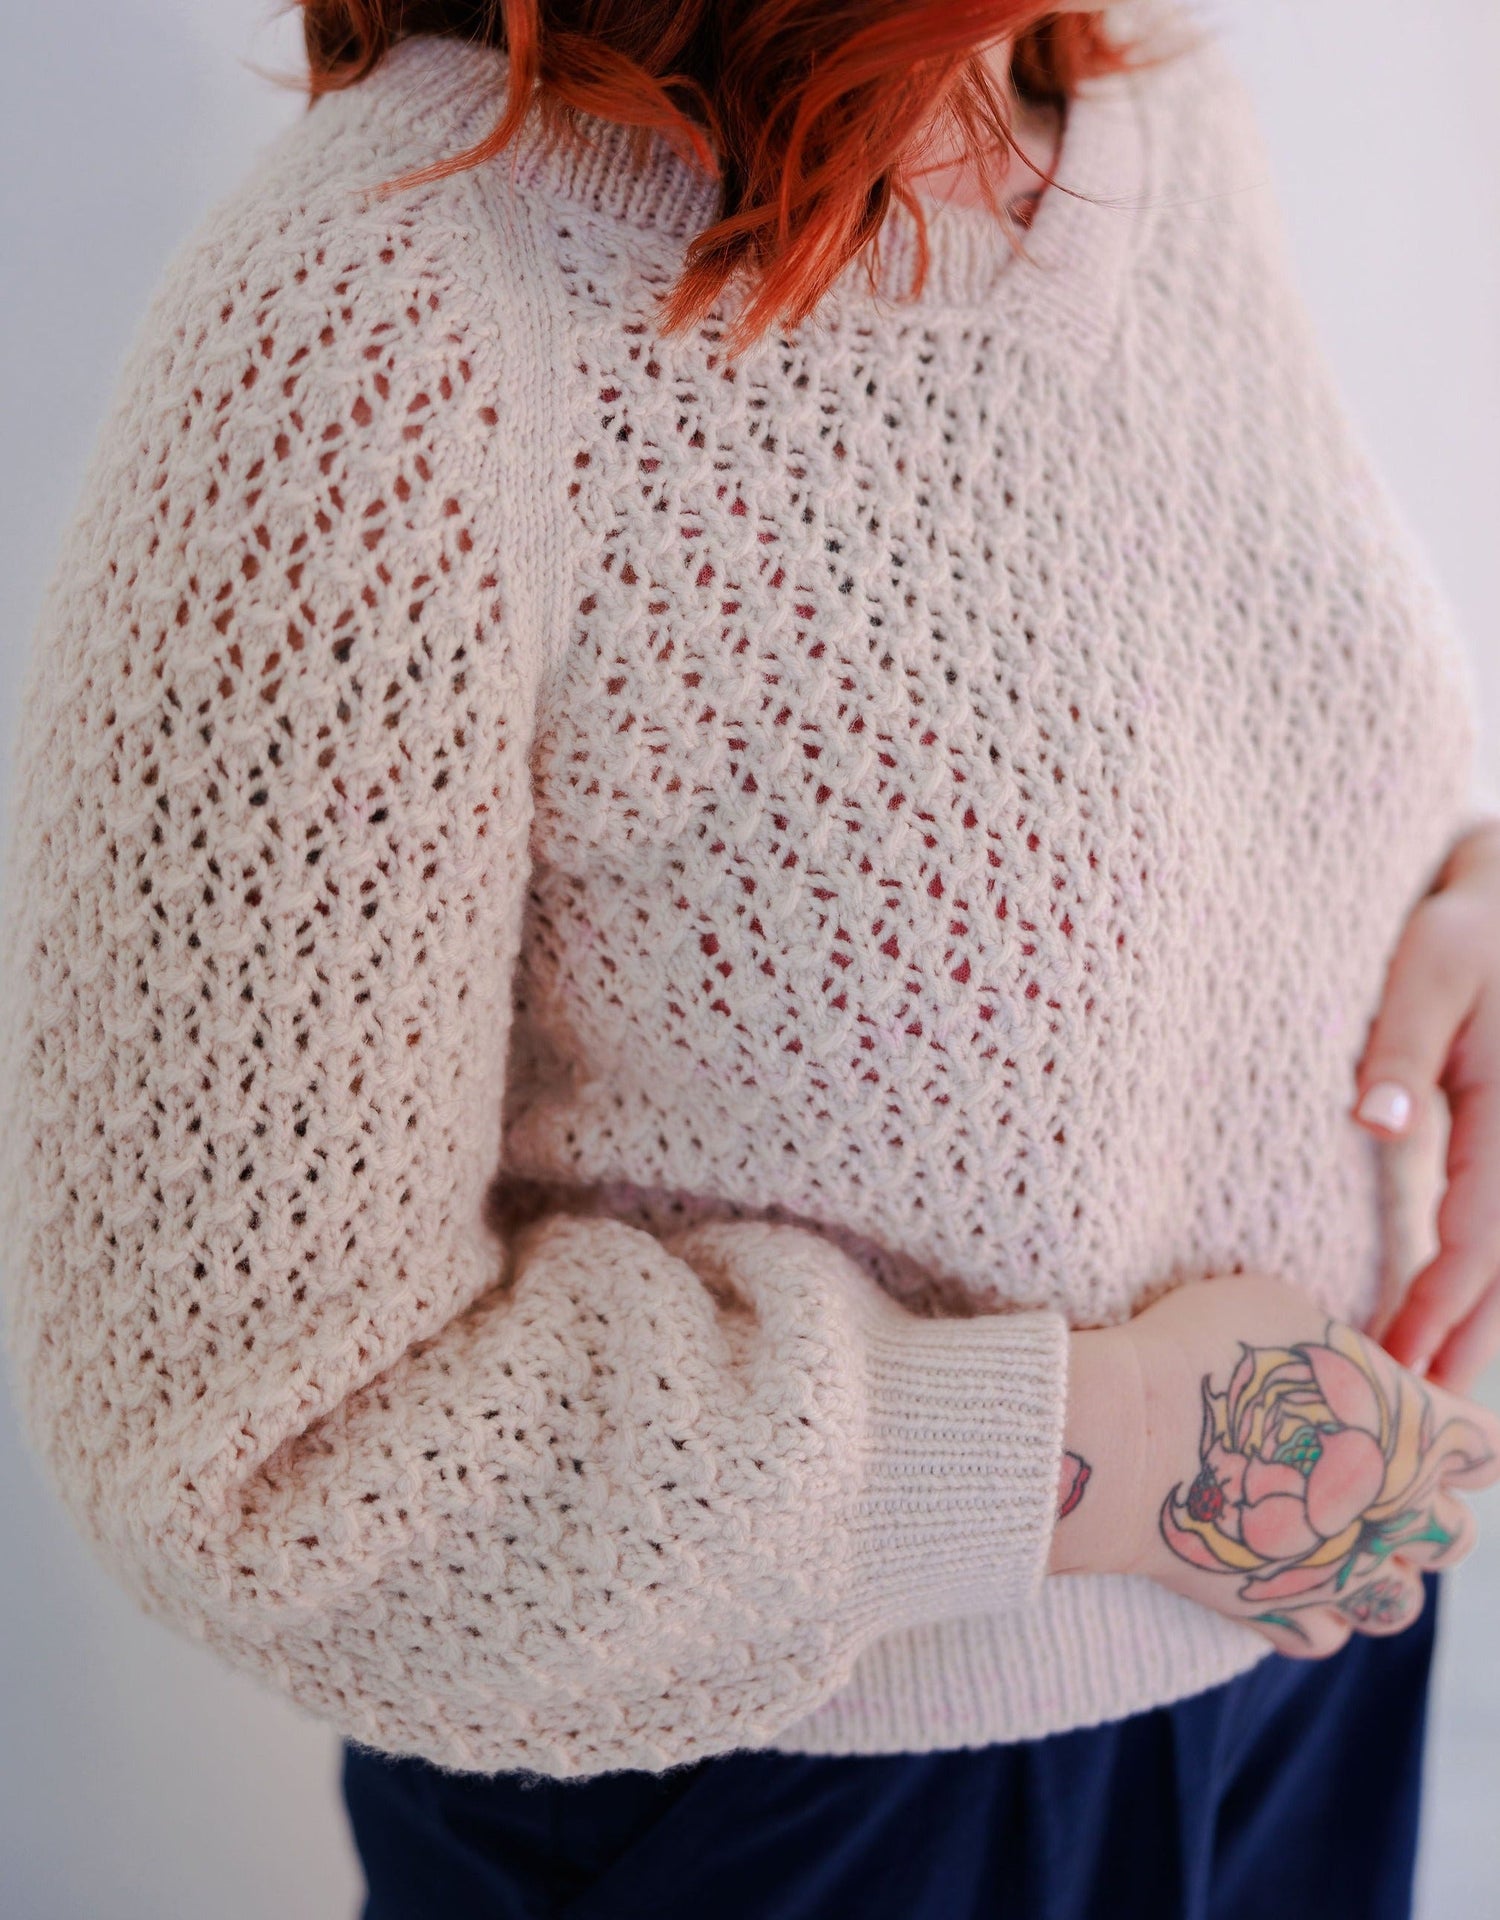 Bess stands at a 3/4 angle to the camera, wearing a cream colored lace knit sweater, the Mary Raglan.